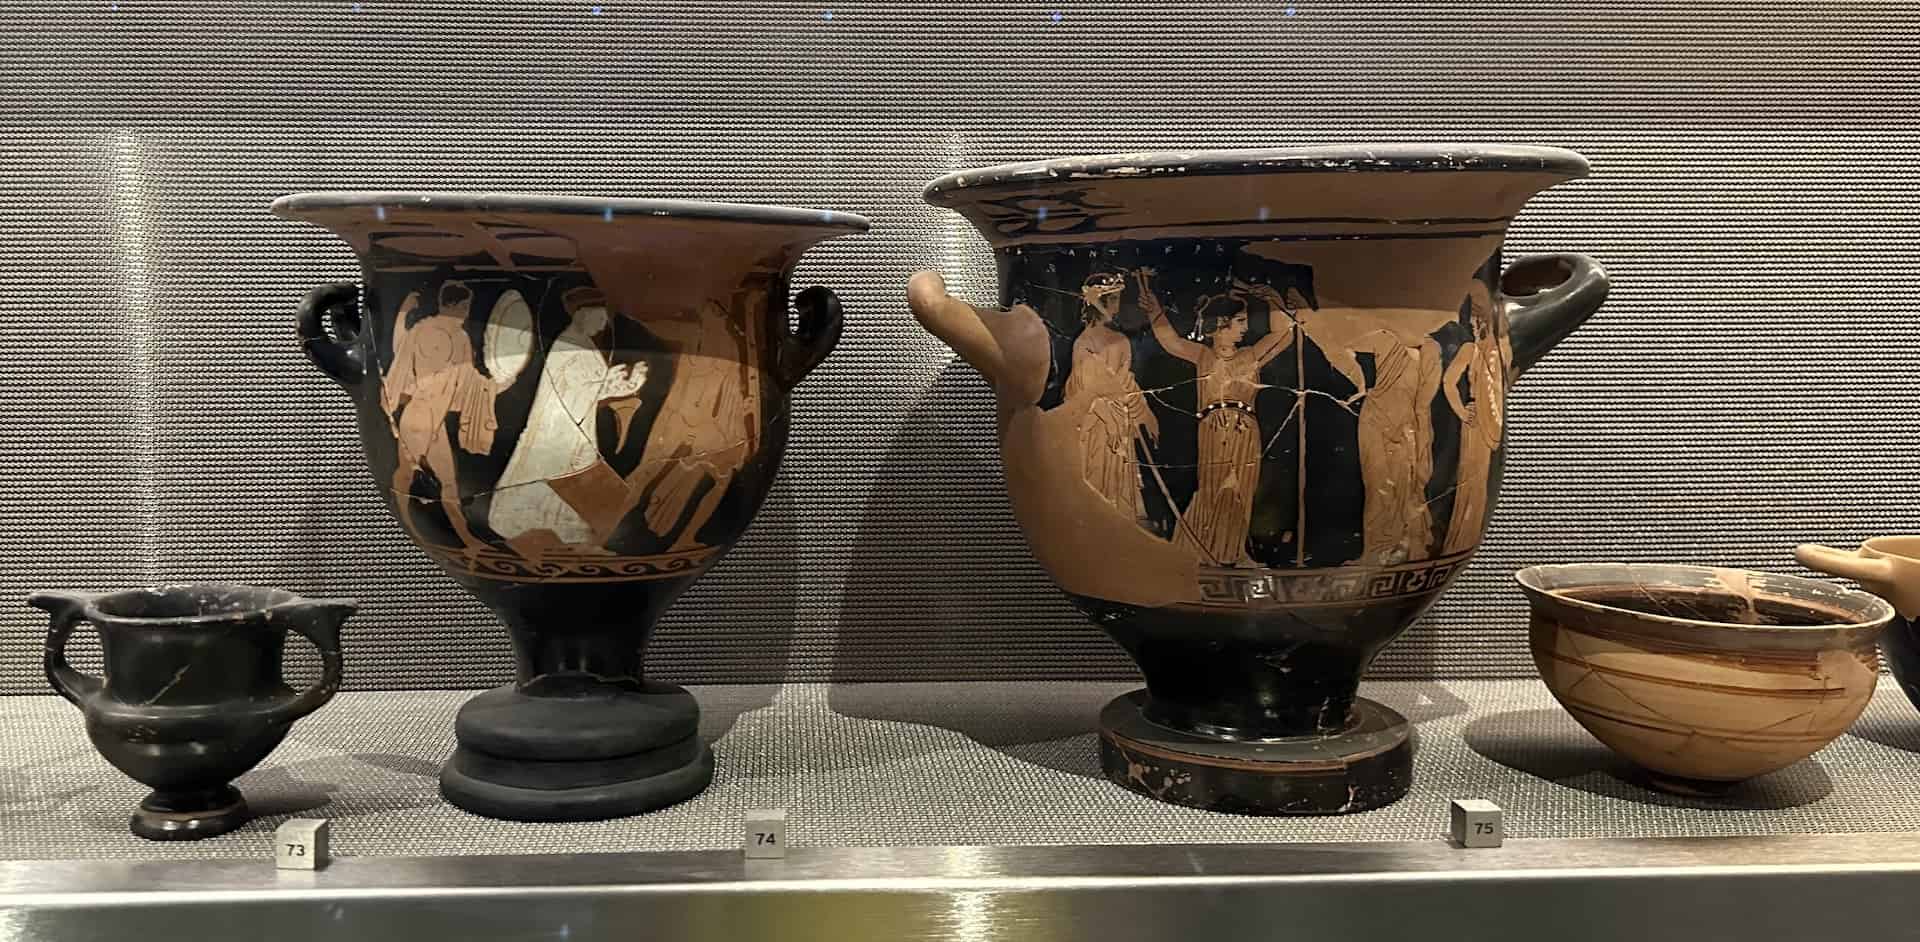 Red-figure krater depicting a religious procession, 350-325 BC (left); Red-figure krater depicting a dancer with castanets, late 5th century BC (right) at the Acropolis Museum in Athens, Greece